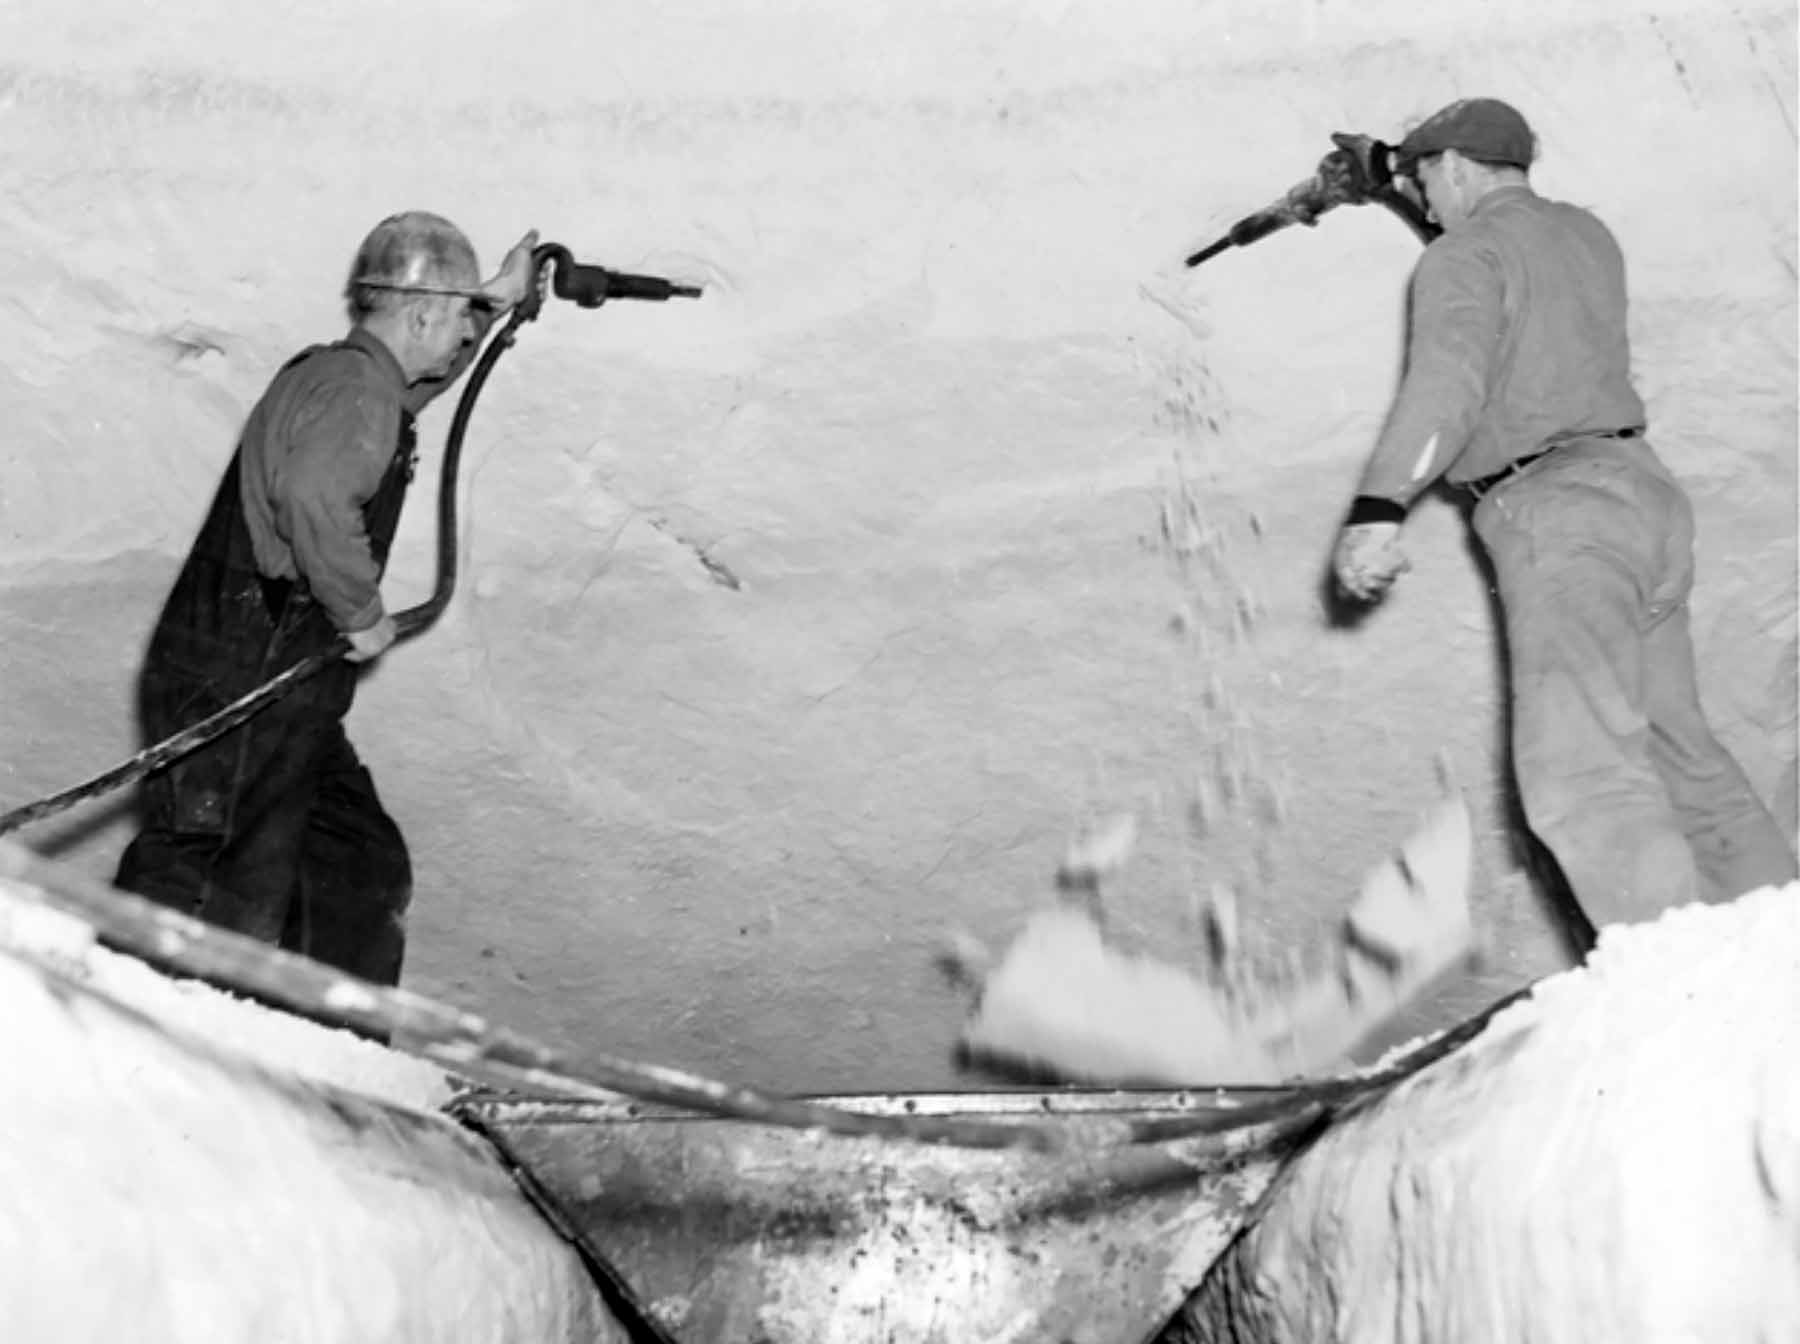 Workers mine silica sand in the tunnels beneath the Ford plant in St. Paul in this 1930s photo.